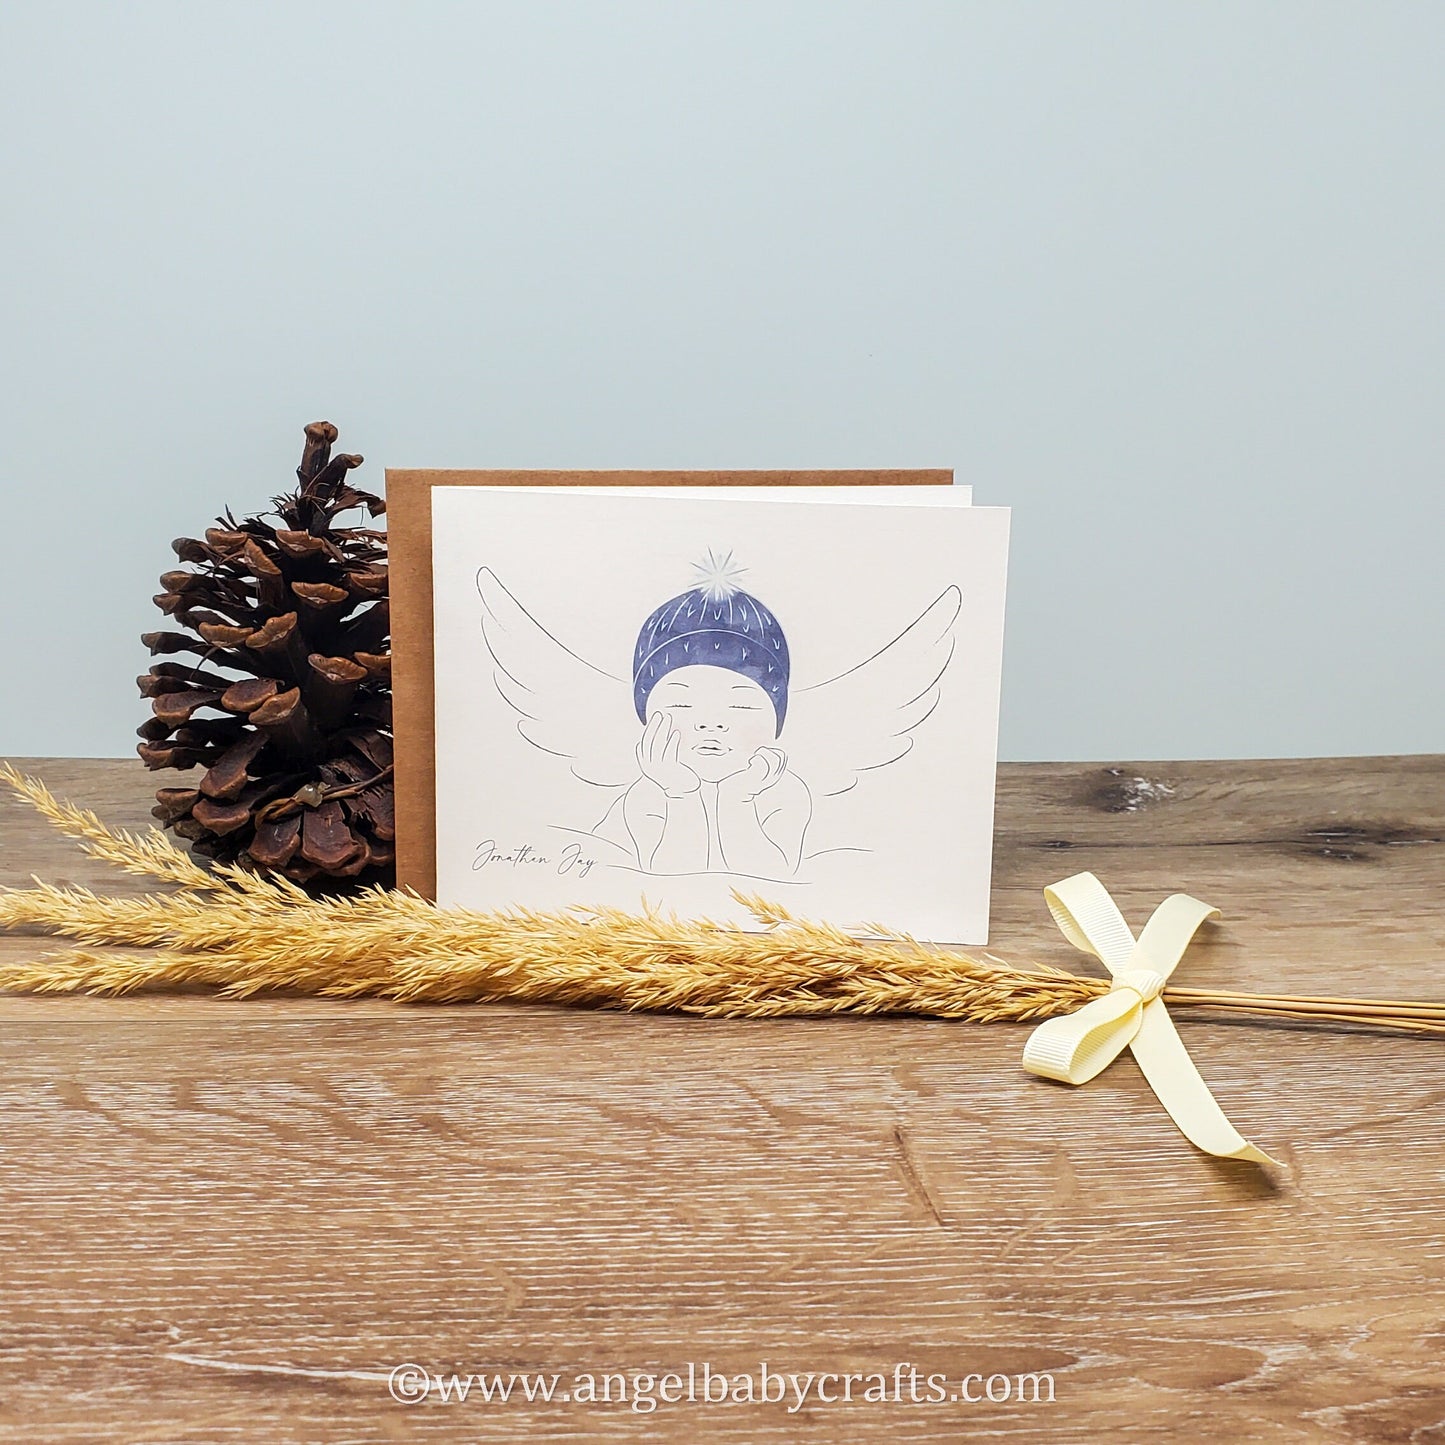 Personalized Baby Loss Card With Digital Print, Sympathy Card, Baby Loss, Stillbirth, Miscarriage Card, Thinking of you Card